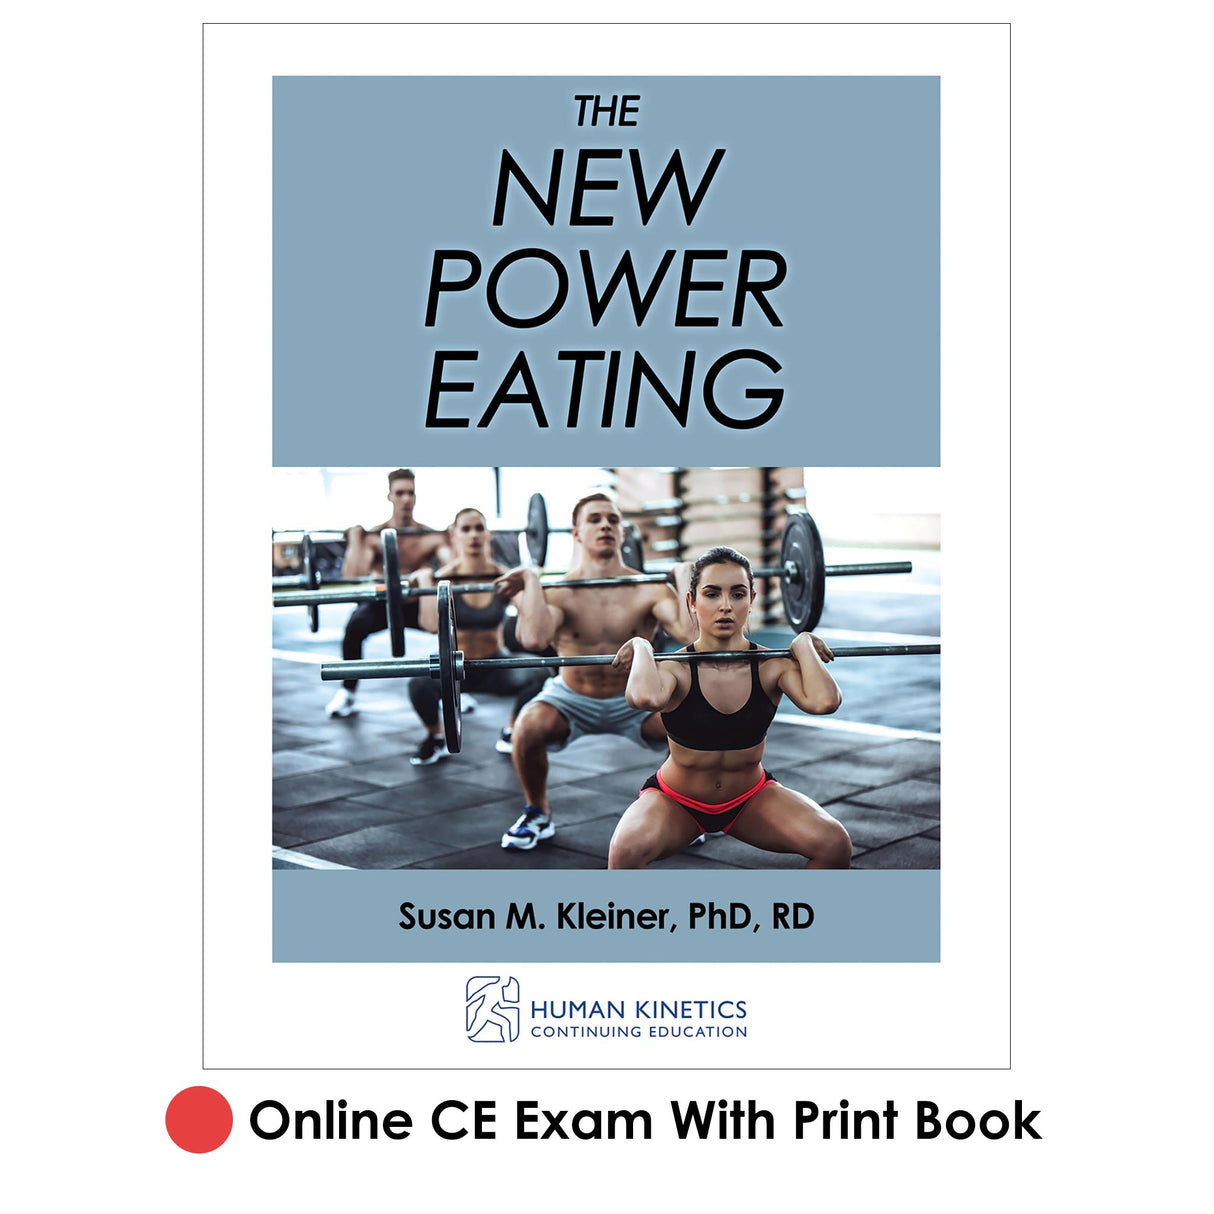 New Power Eating Online CE Exam With Print Book, The